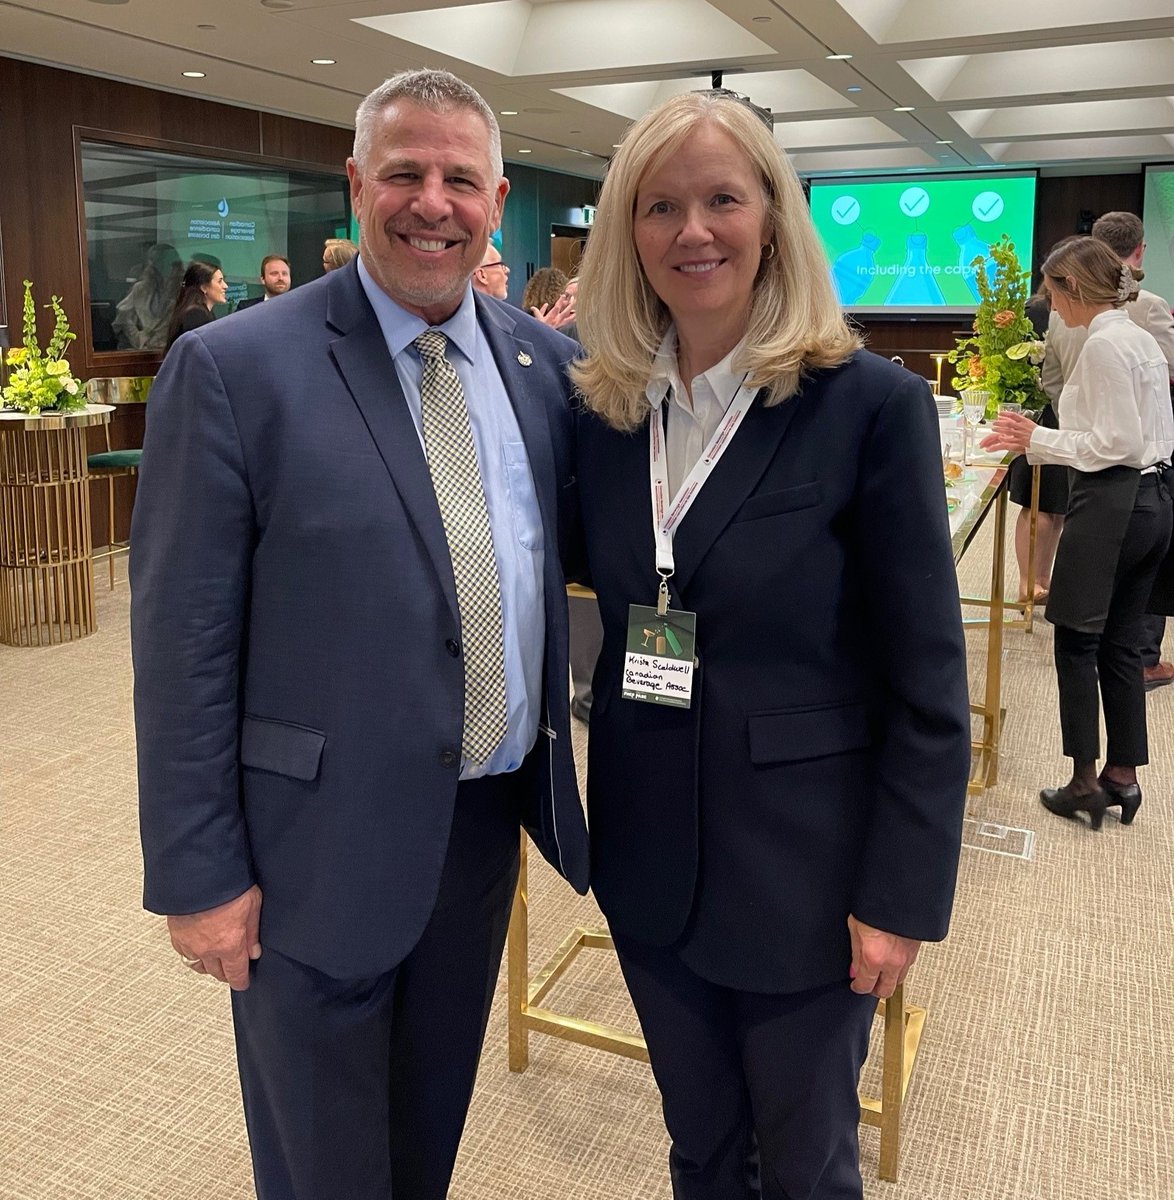 It was a pleasure to support the Canadian Beverage Association and Food, Health & Consumer Products of Canada reception. Pictured with me is Krista Scaldwell the President of the Canadian Beverage Association.